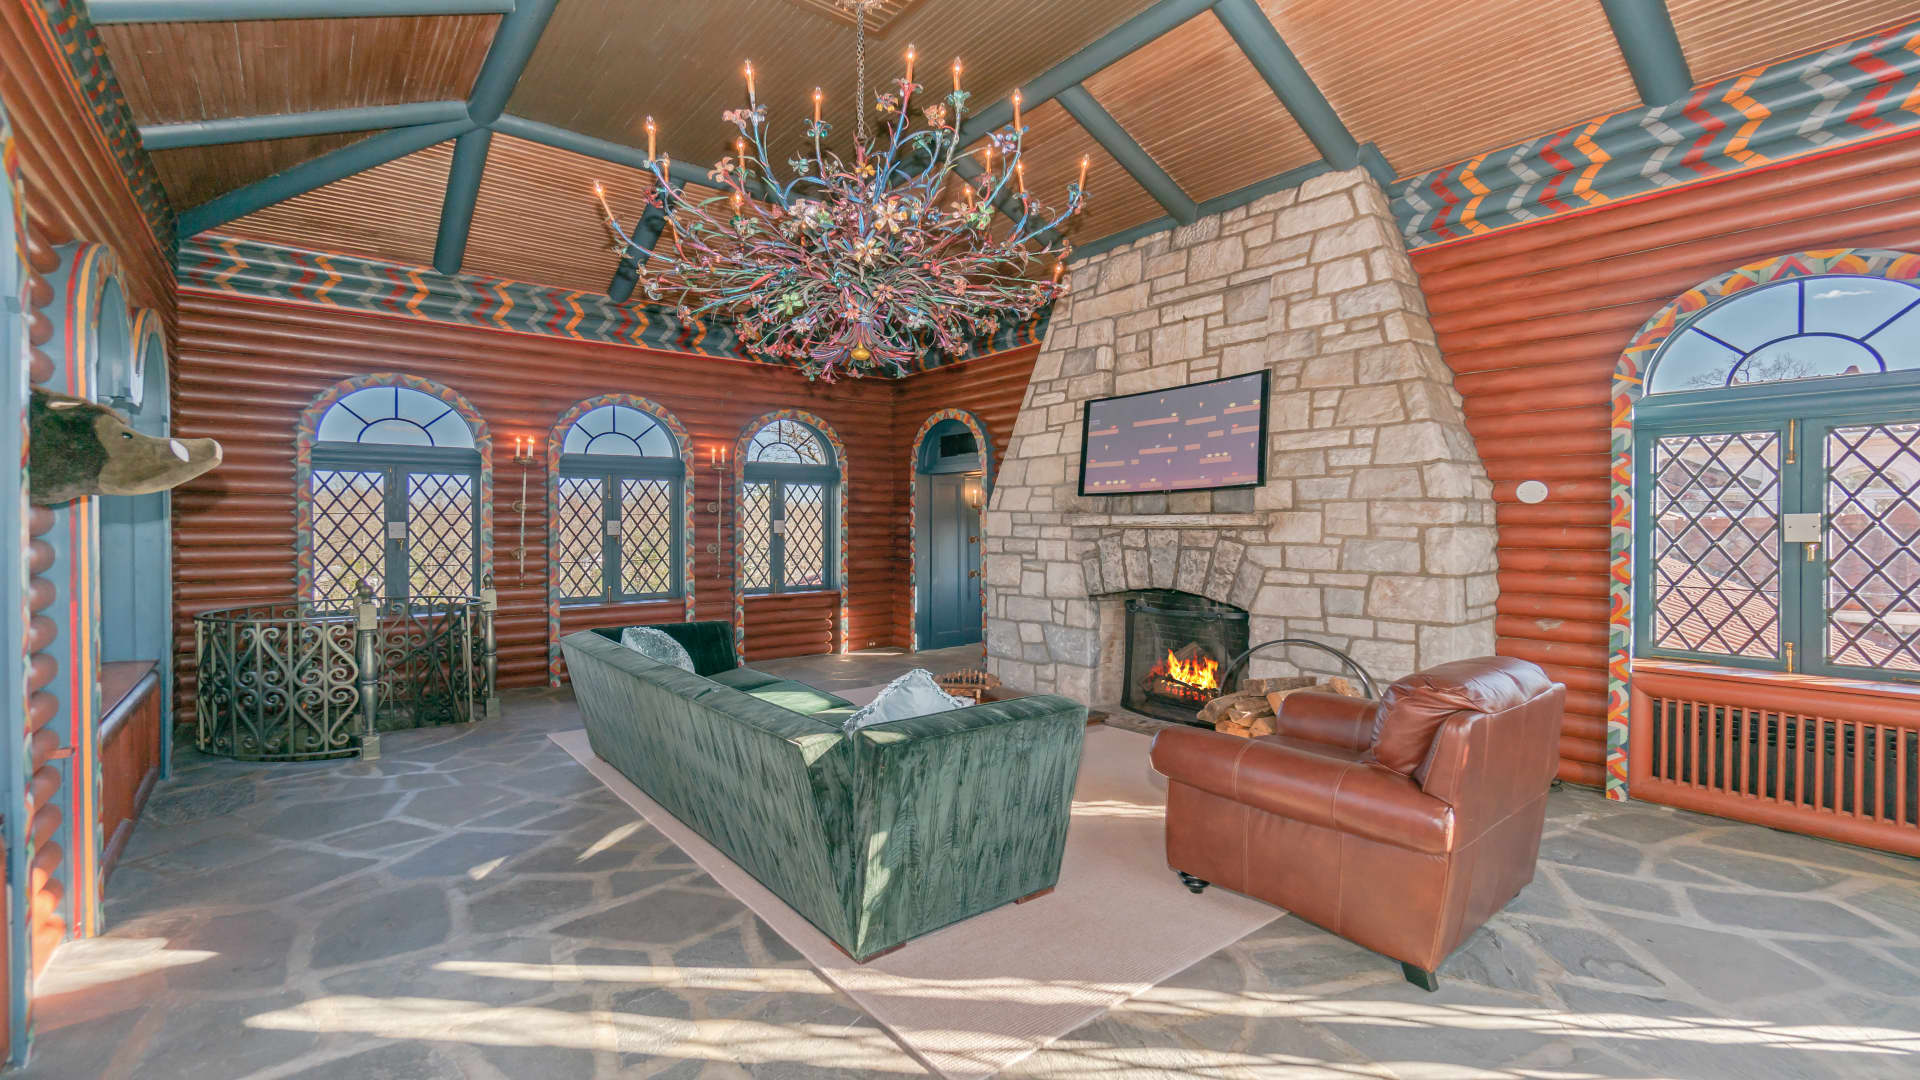 A sitting area and stone fireplace in one of the home's 28 rooms.